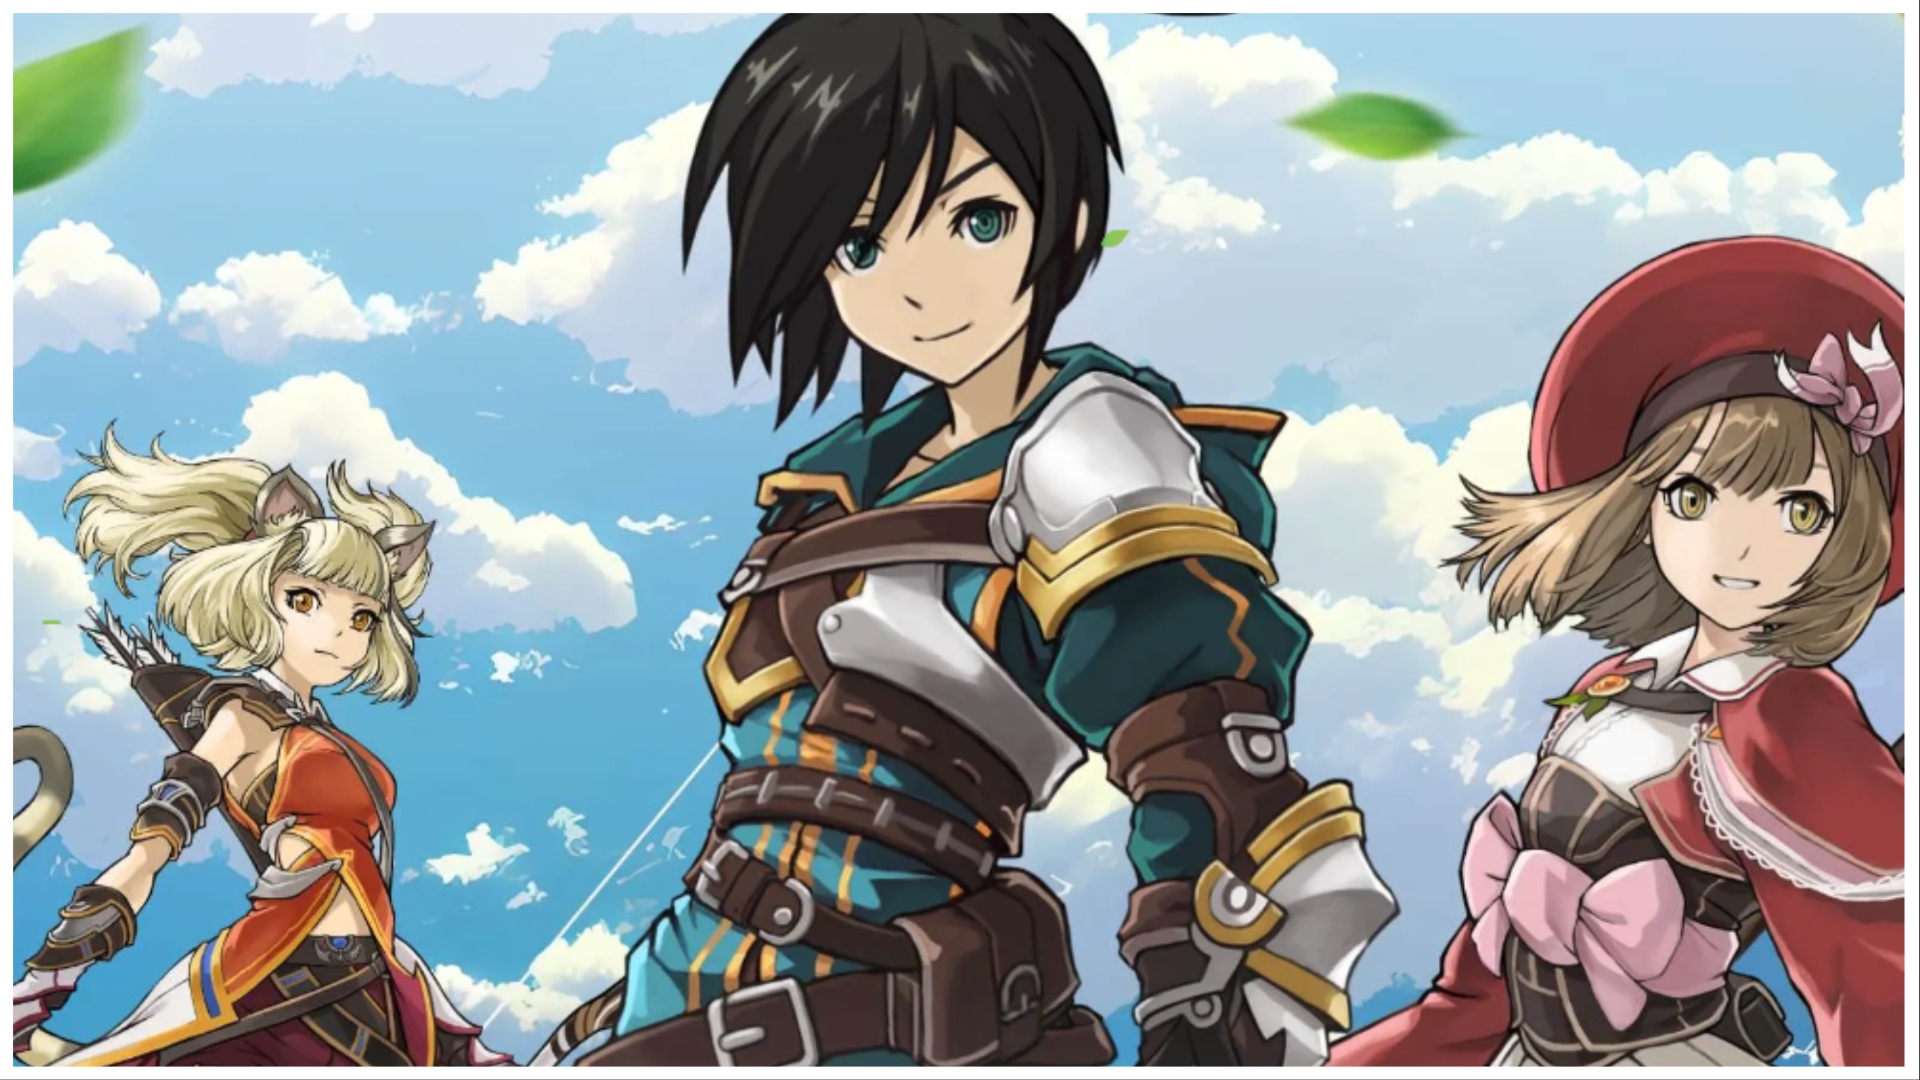 The illustration shows a stunning blue sky with three of the main cast lined up and facing the viewer. Leaves are falling around them with a nice subtle blur effect